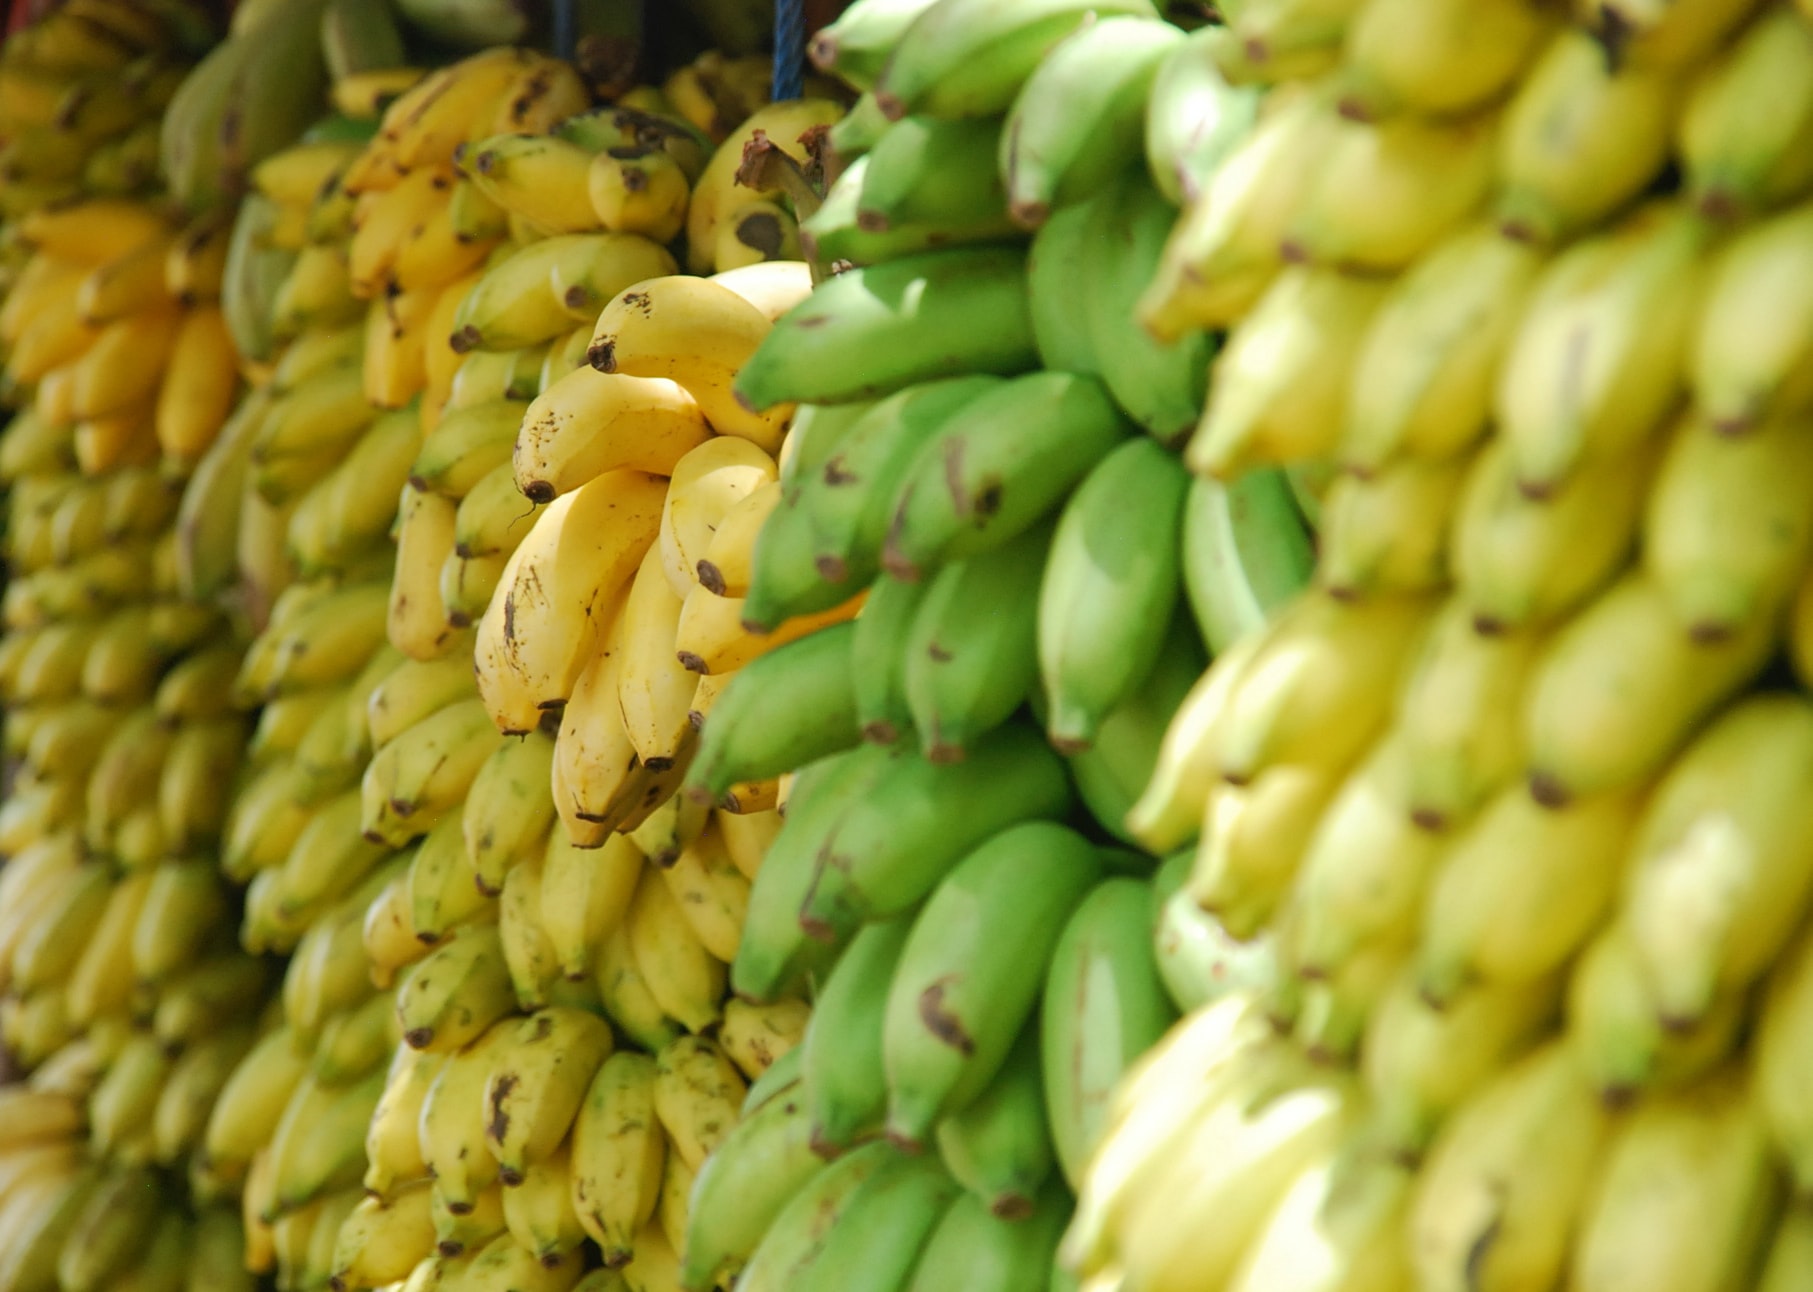 Green bananas are a great source of resistant starch